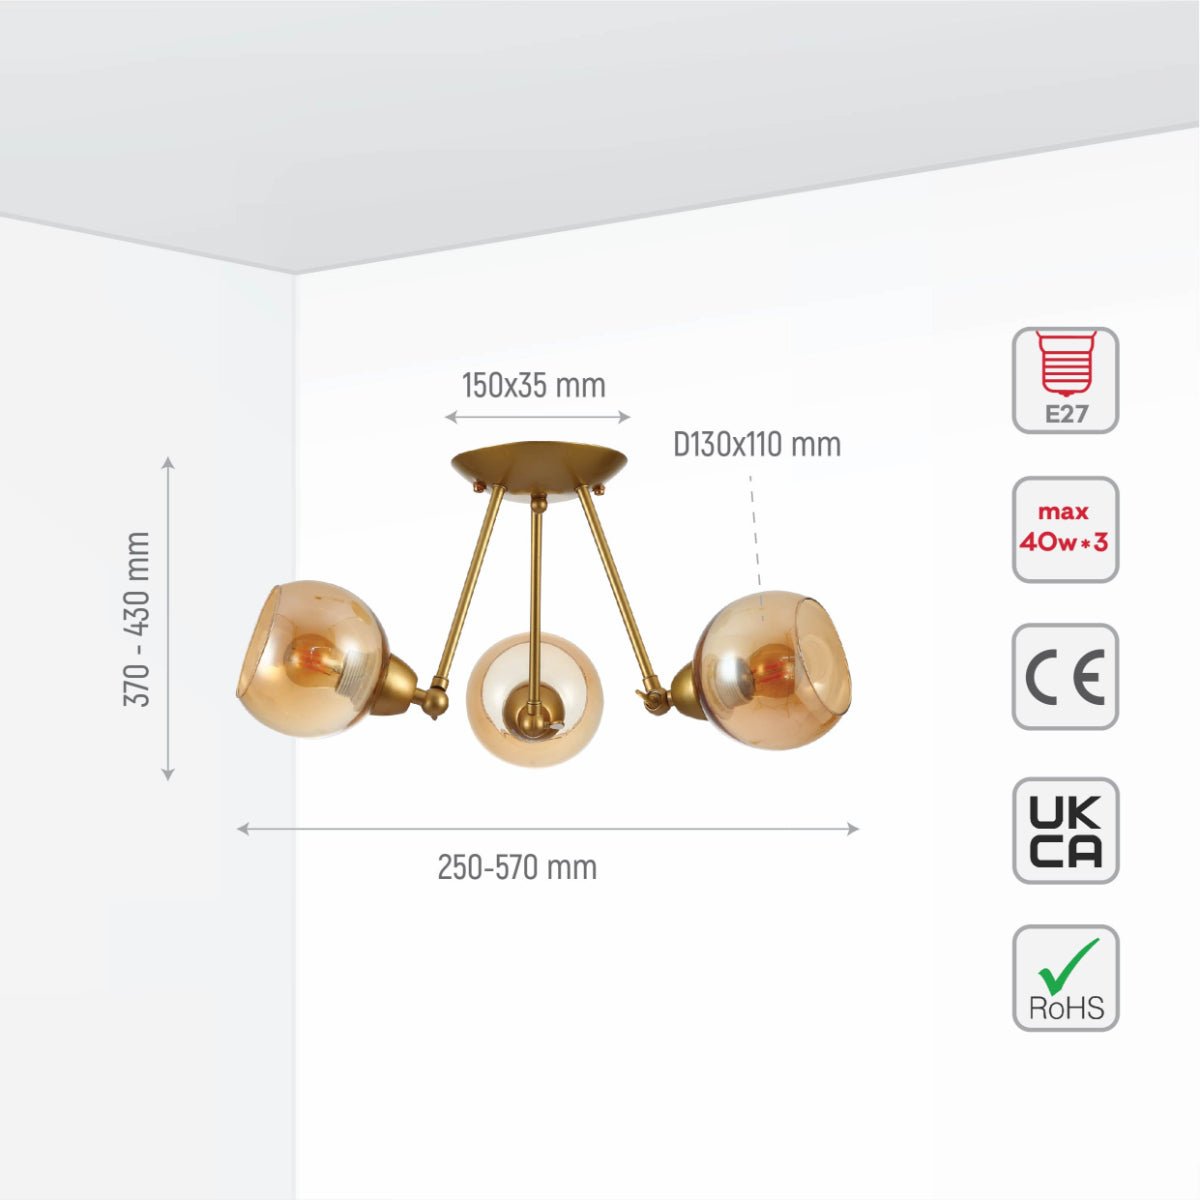 Size and specs of Gold Hinged Metal Amber Dome Glass Ceiling Light with E27 Fittings | TEKLED 159-17648